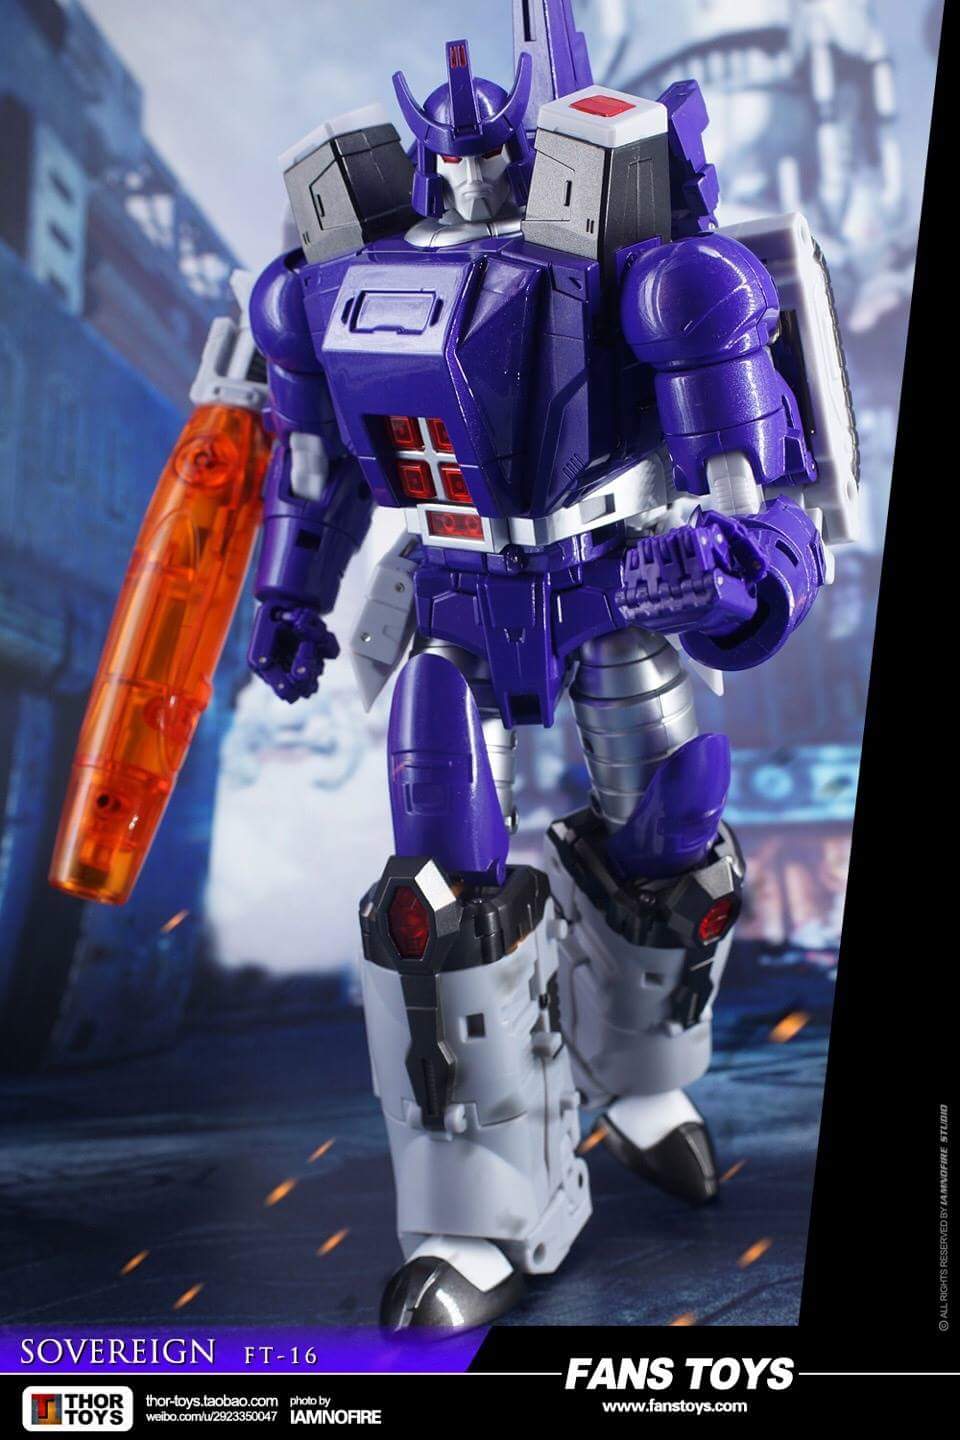 [Fanstoys] Produit Tiers - FT-16 Sovereign - aka Galvatron - Page 3 KQiS3O8S